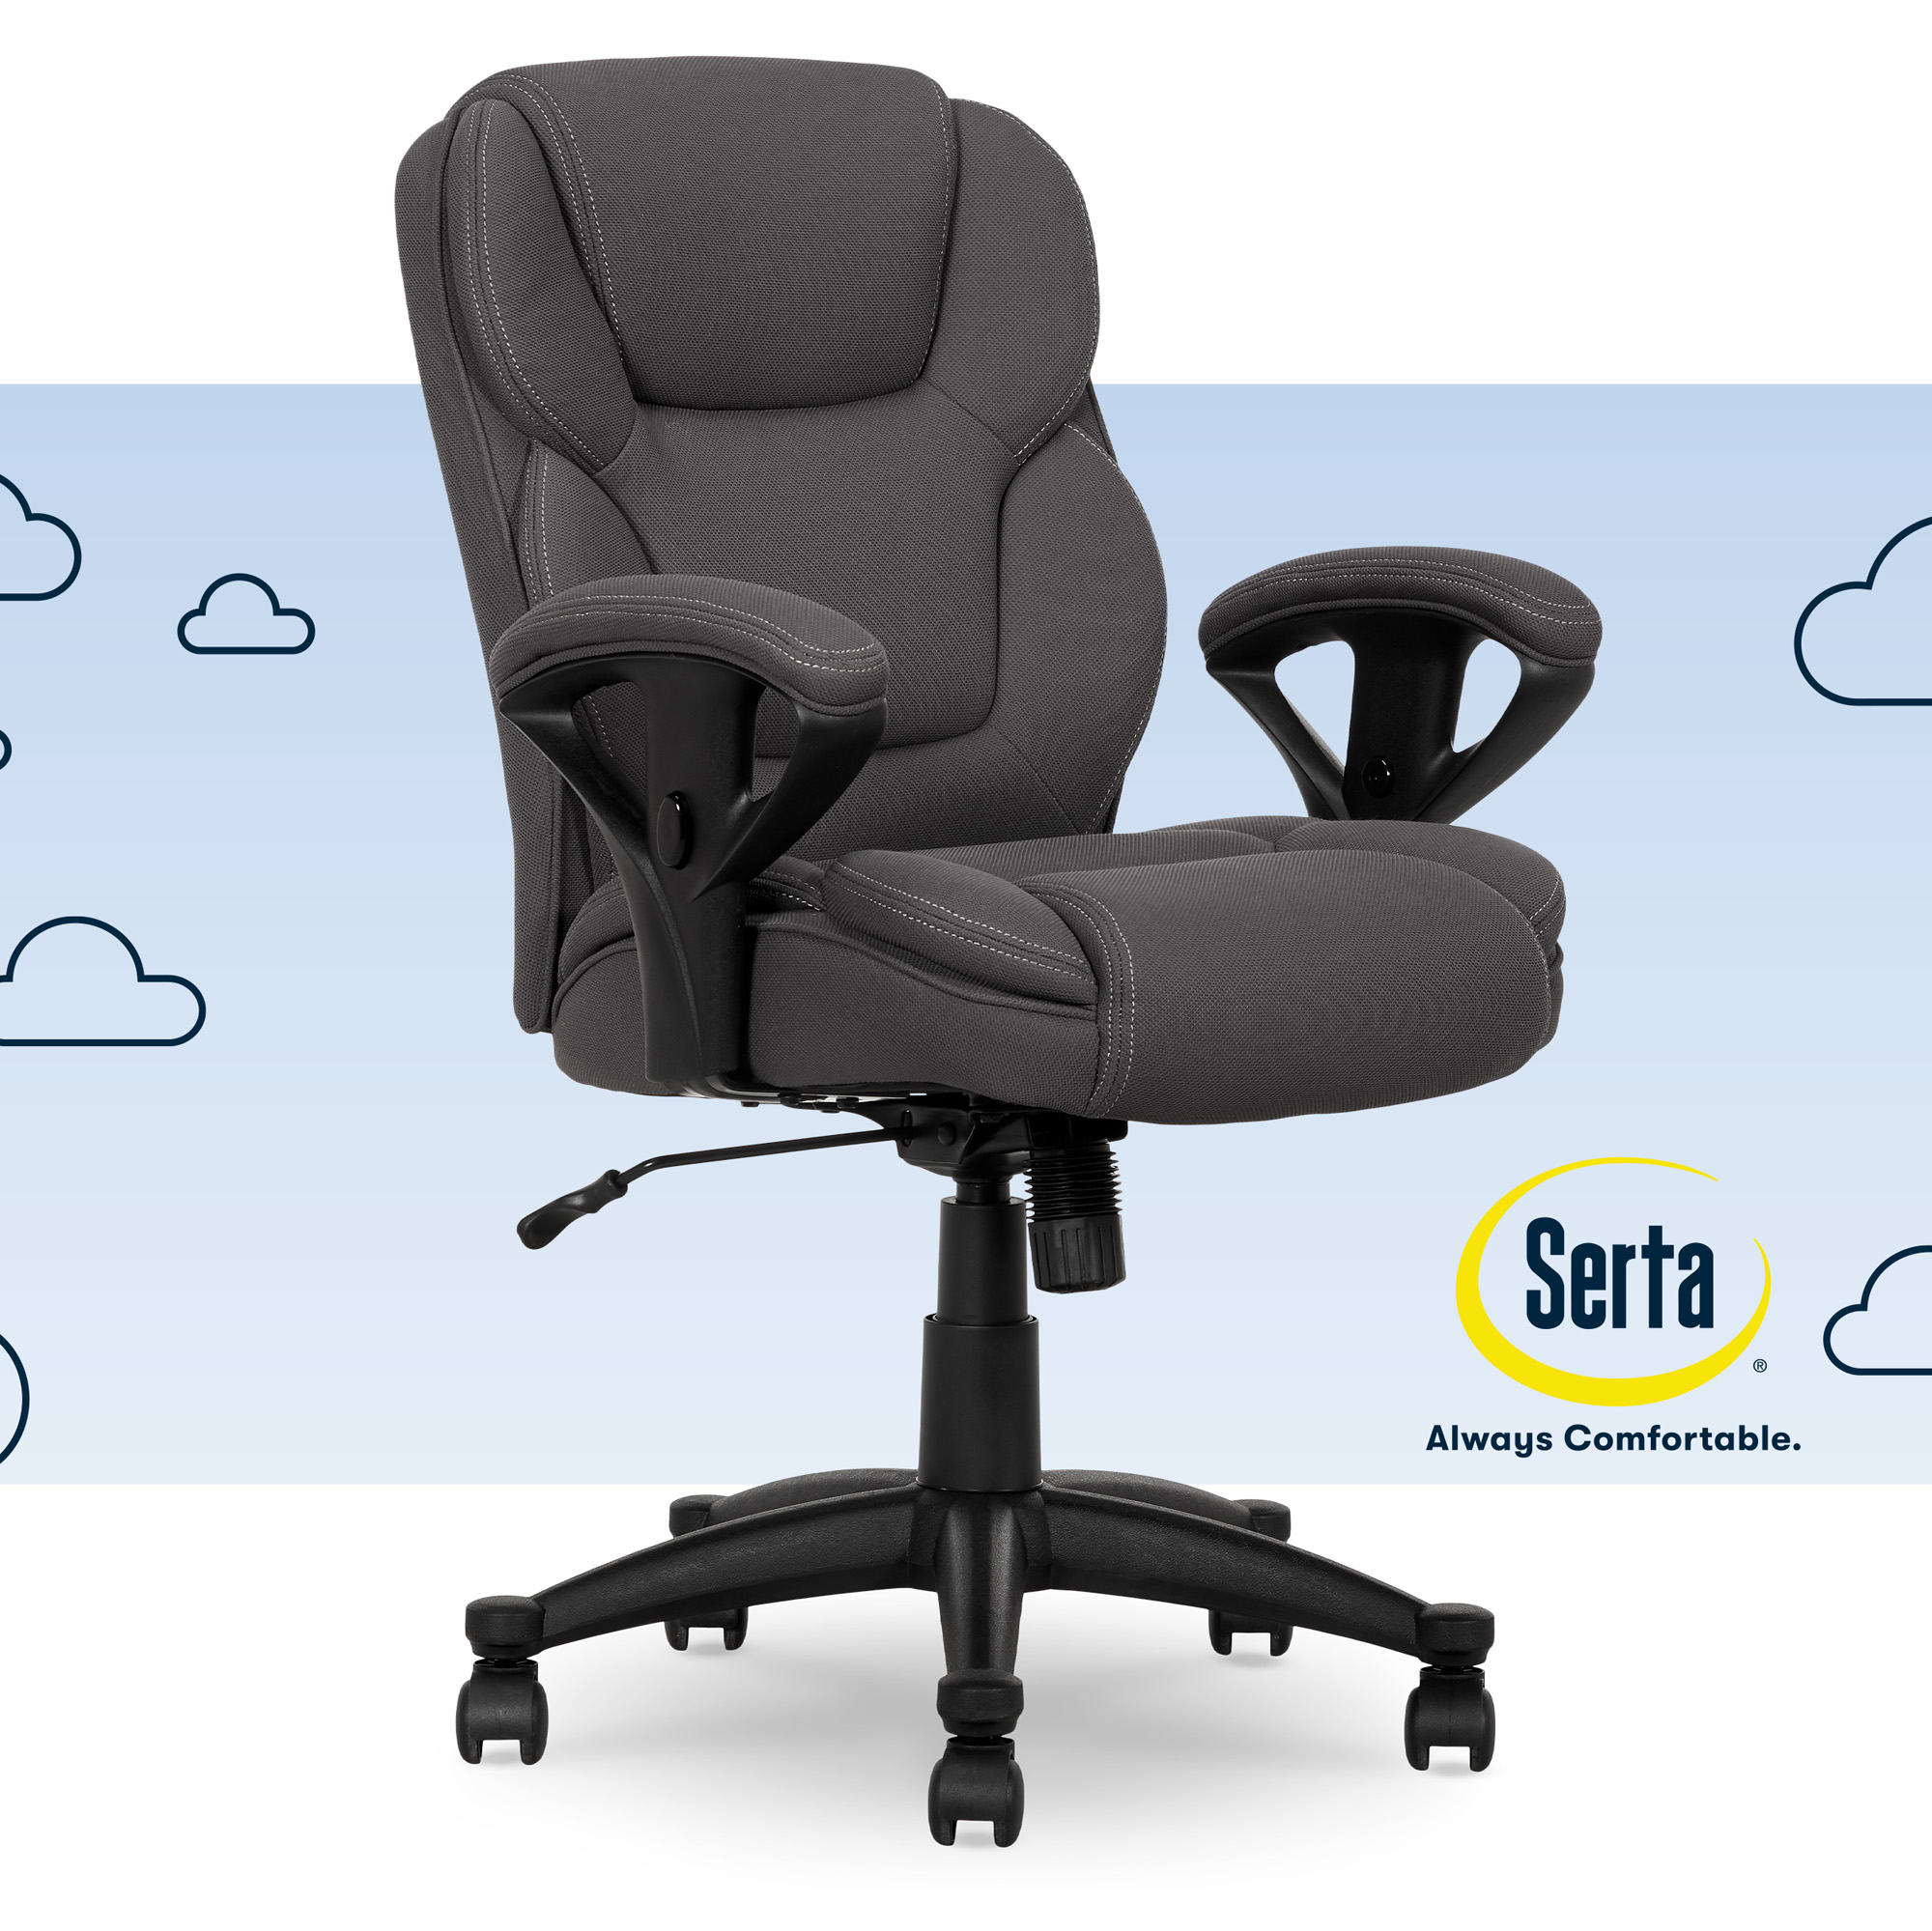 Serta Commercial Grade Task Office Chair, Supports up to 300 lbs., Dark Gray - image 1 of 15